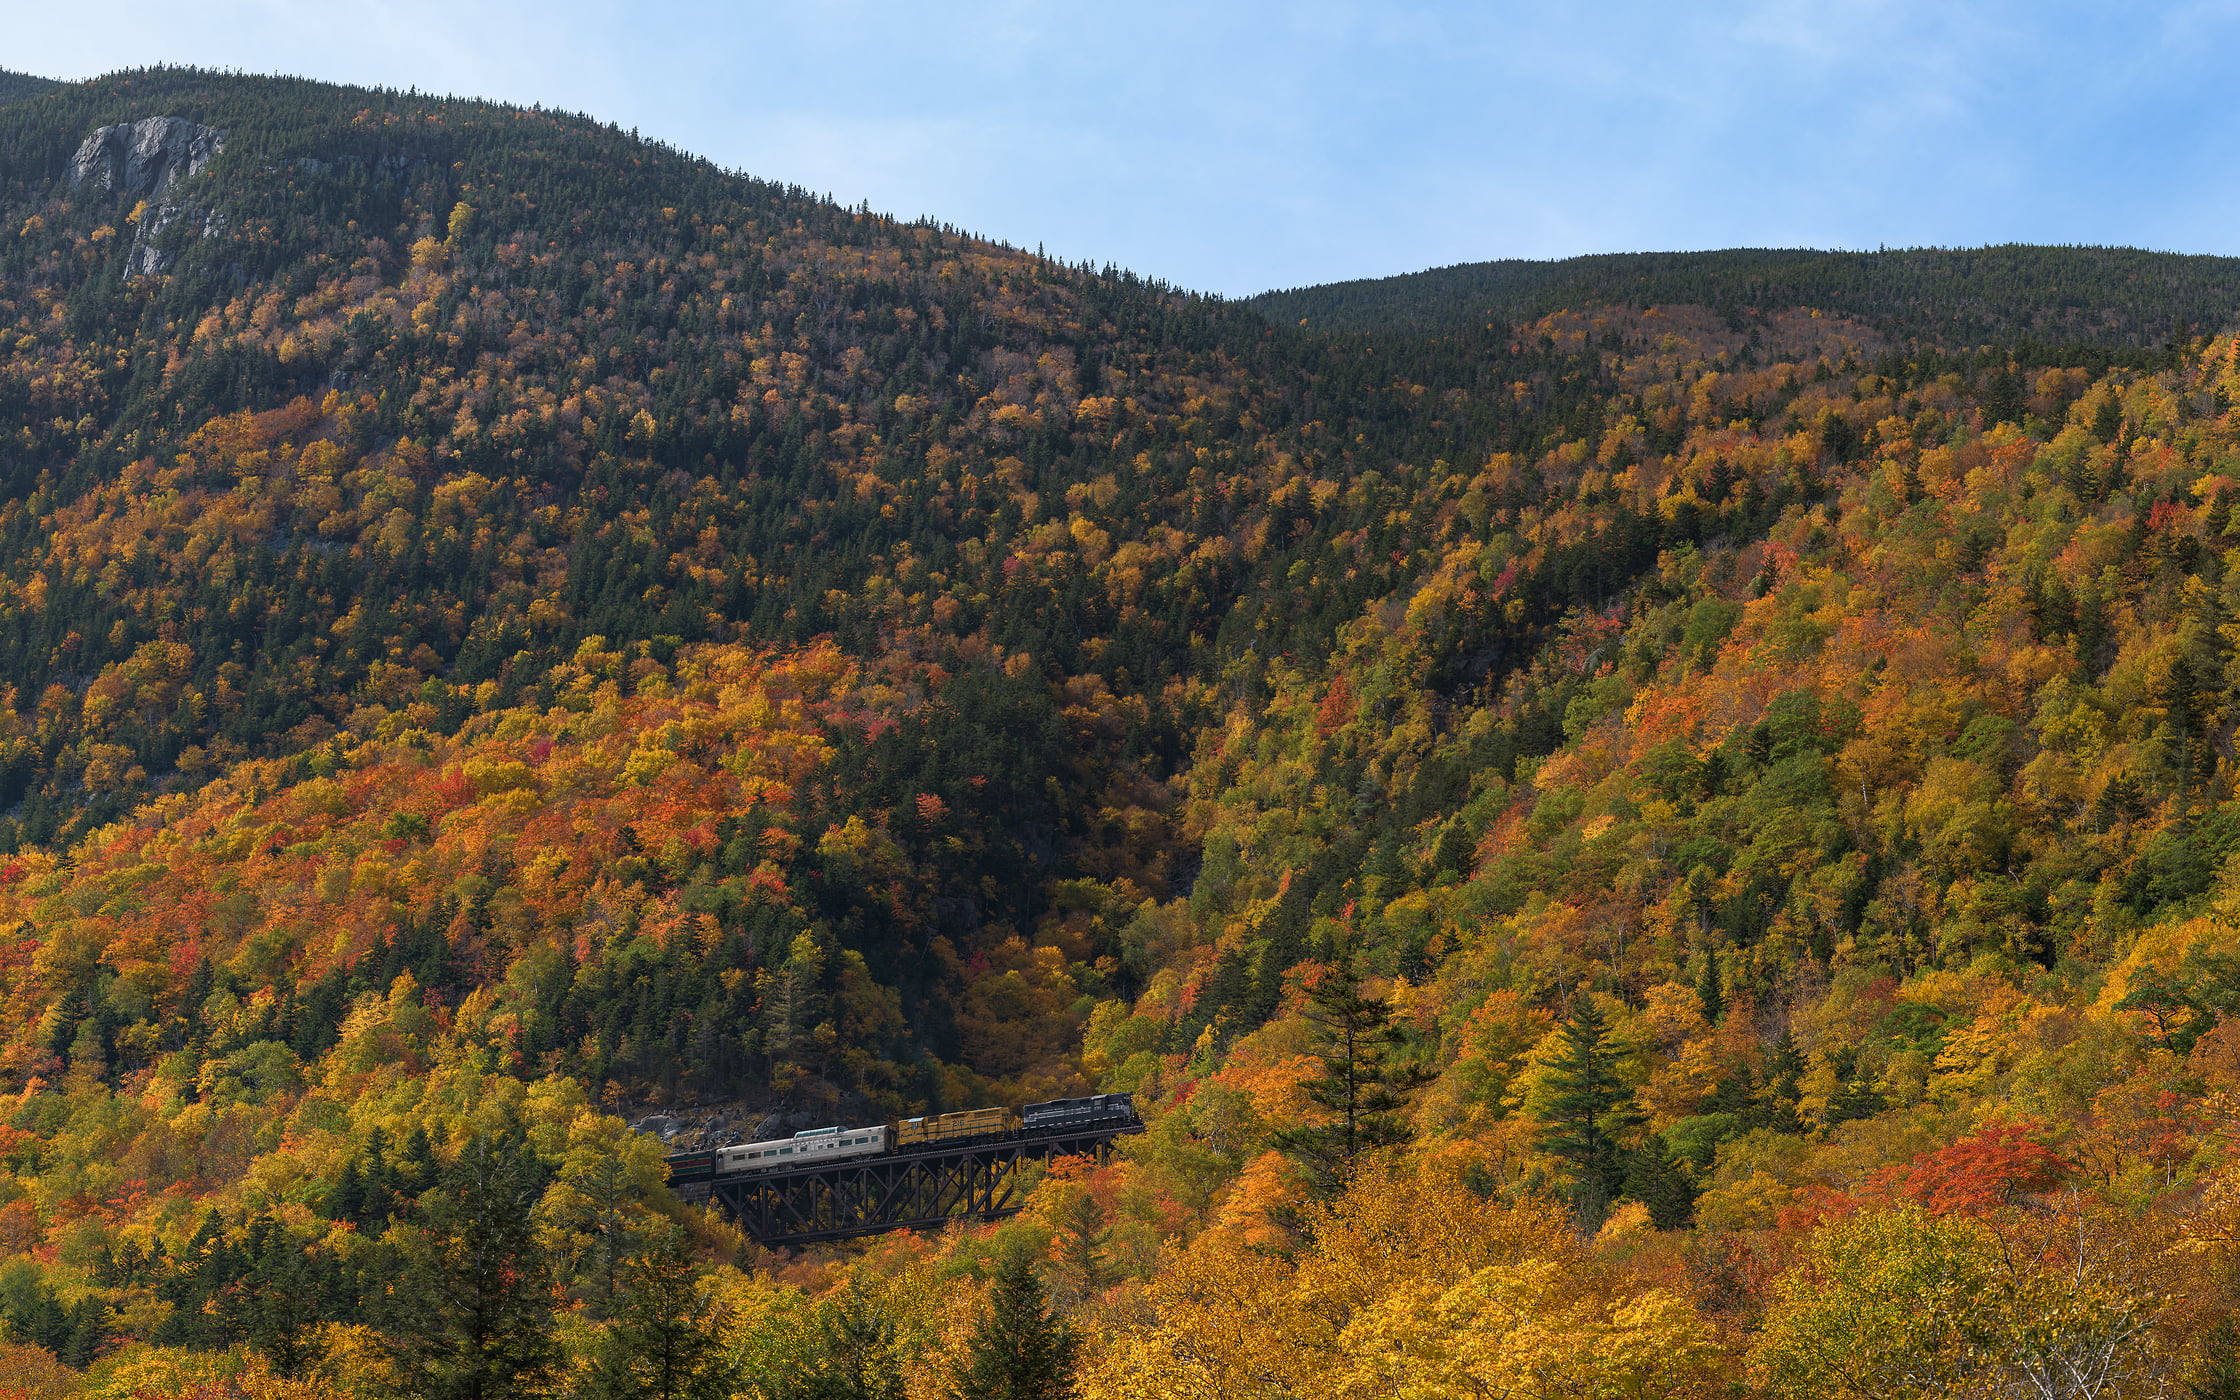 402 megapixels! A very high resolution, large-format VAST photo print of a train amid autumn foliage on a mountain; photograph created by Aaron Priest in Hart's Location, New Hampshire.